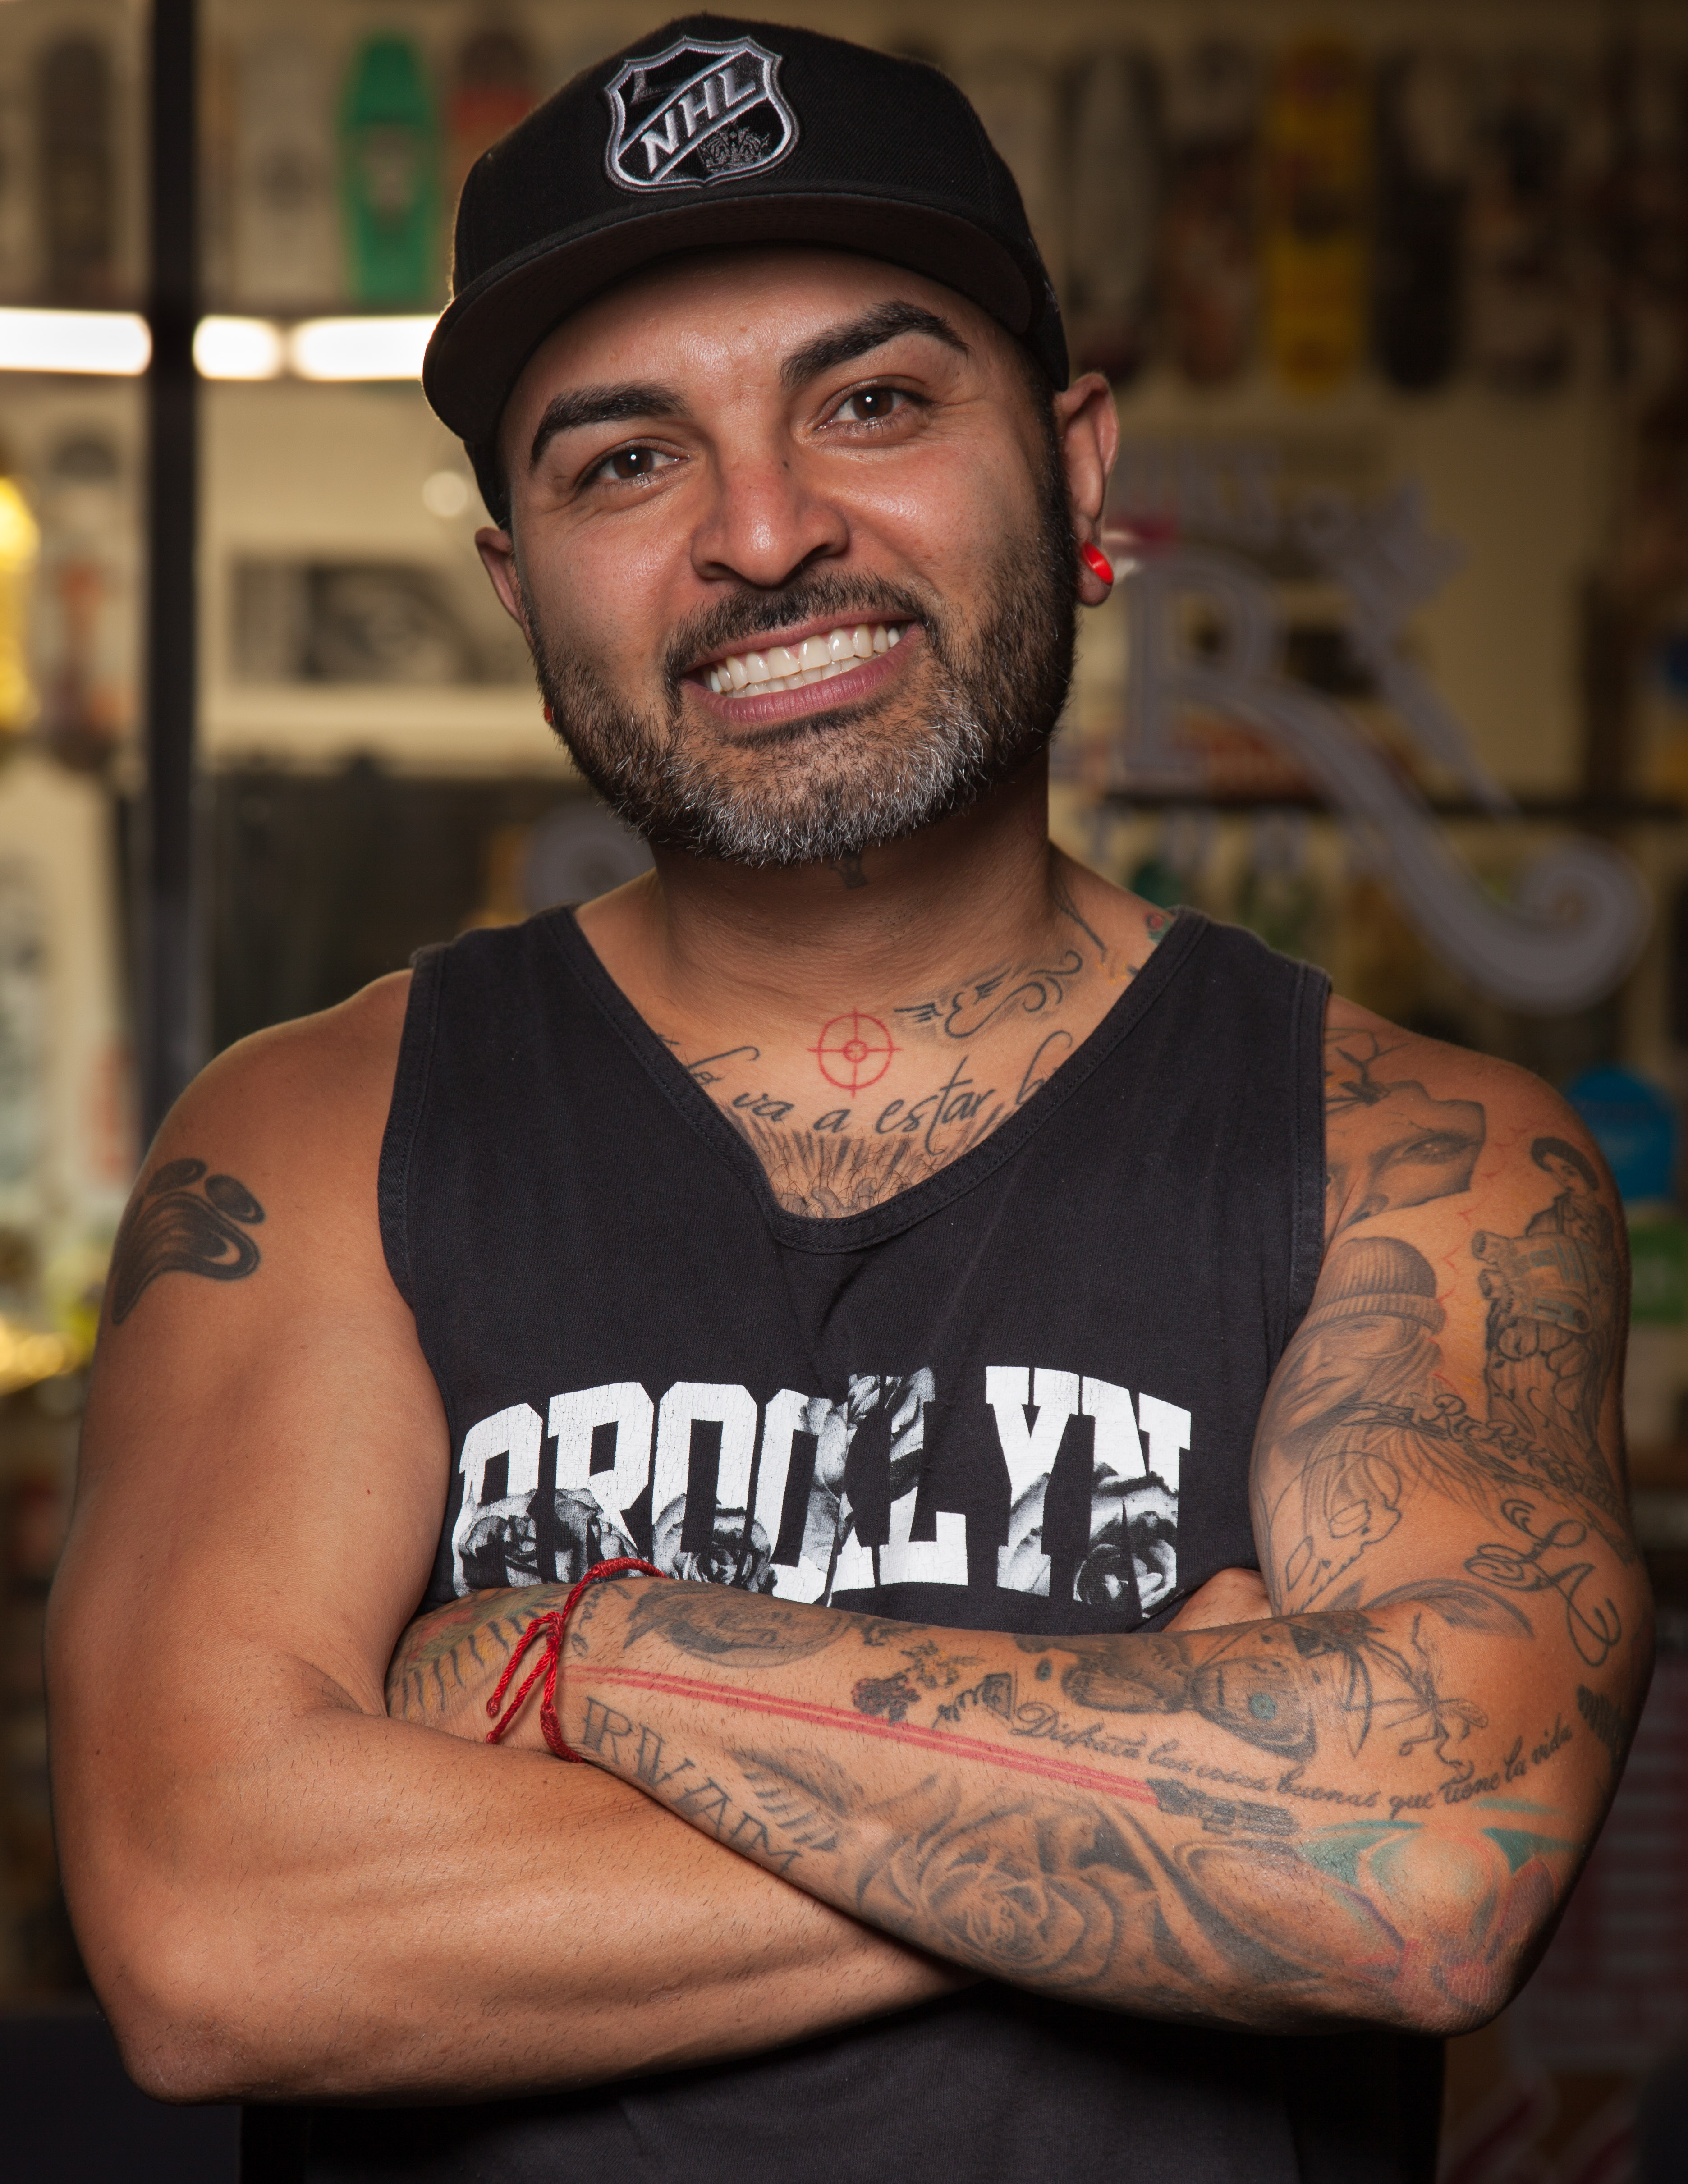 Portait of a man with tattoos